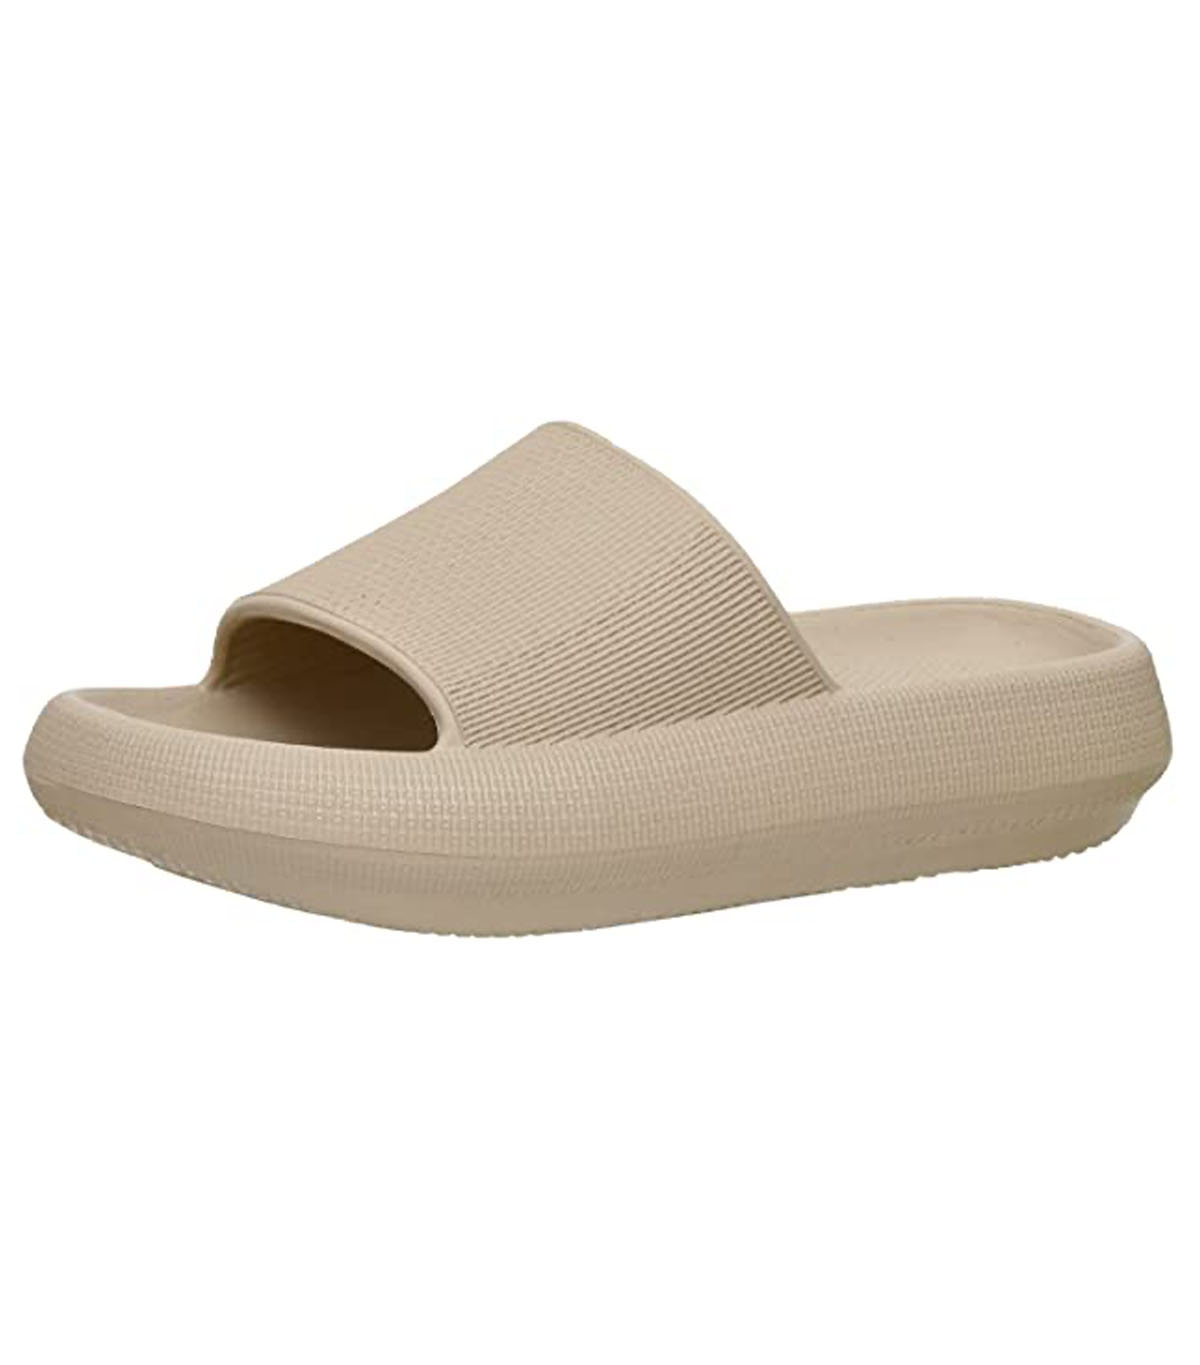 Cushionaire Feather Recovery Pool Slide Sandals